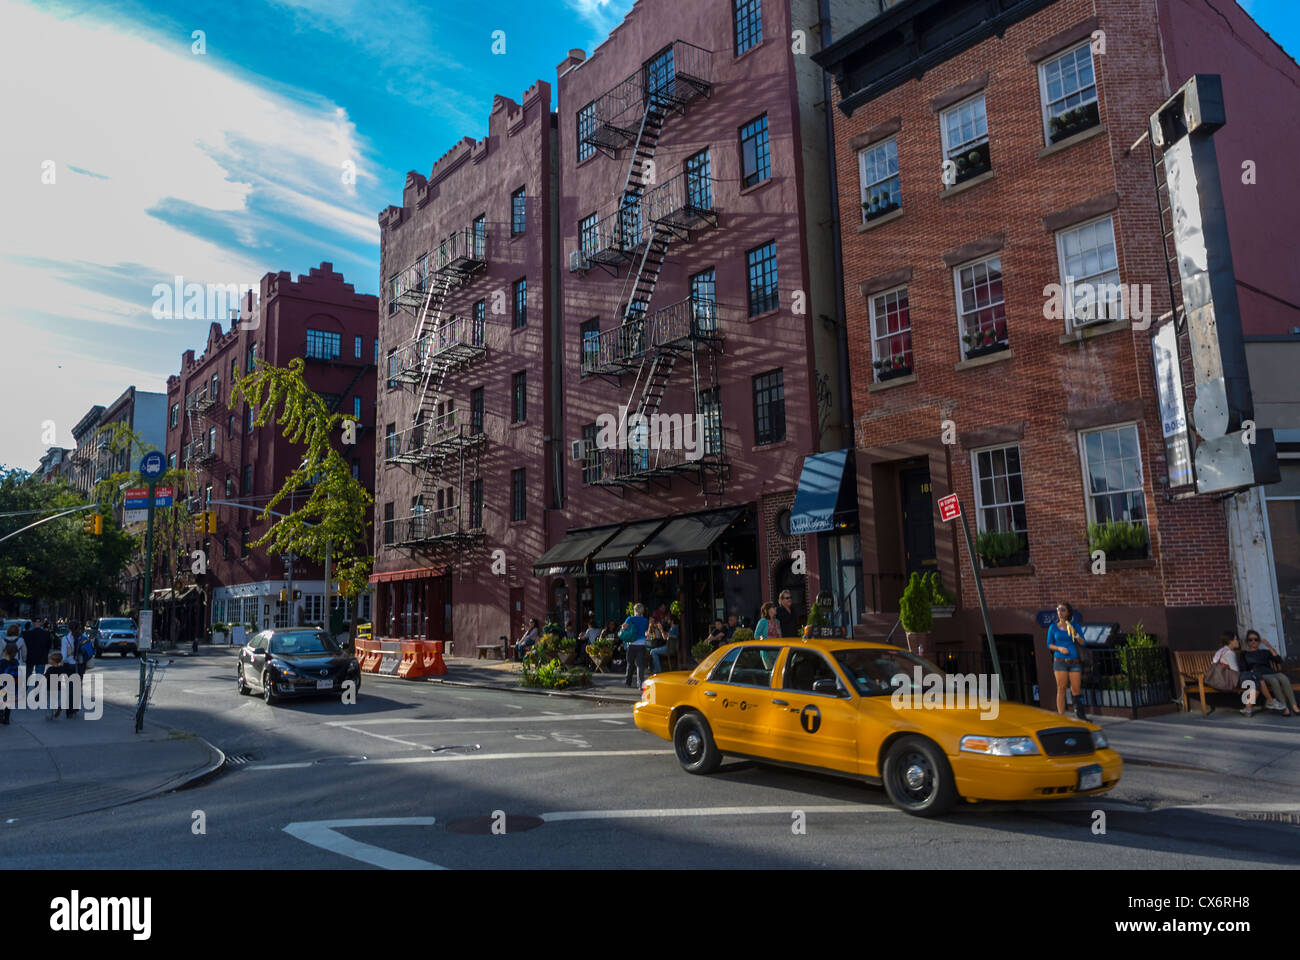 New York, NY, USA, Greenwich Village Street Scene, 7th Ave, Manhattan, Tenements Buildings , new yorkers buildings Stock Photo